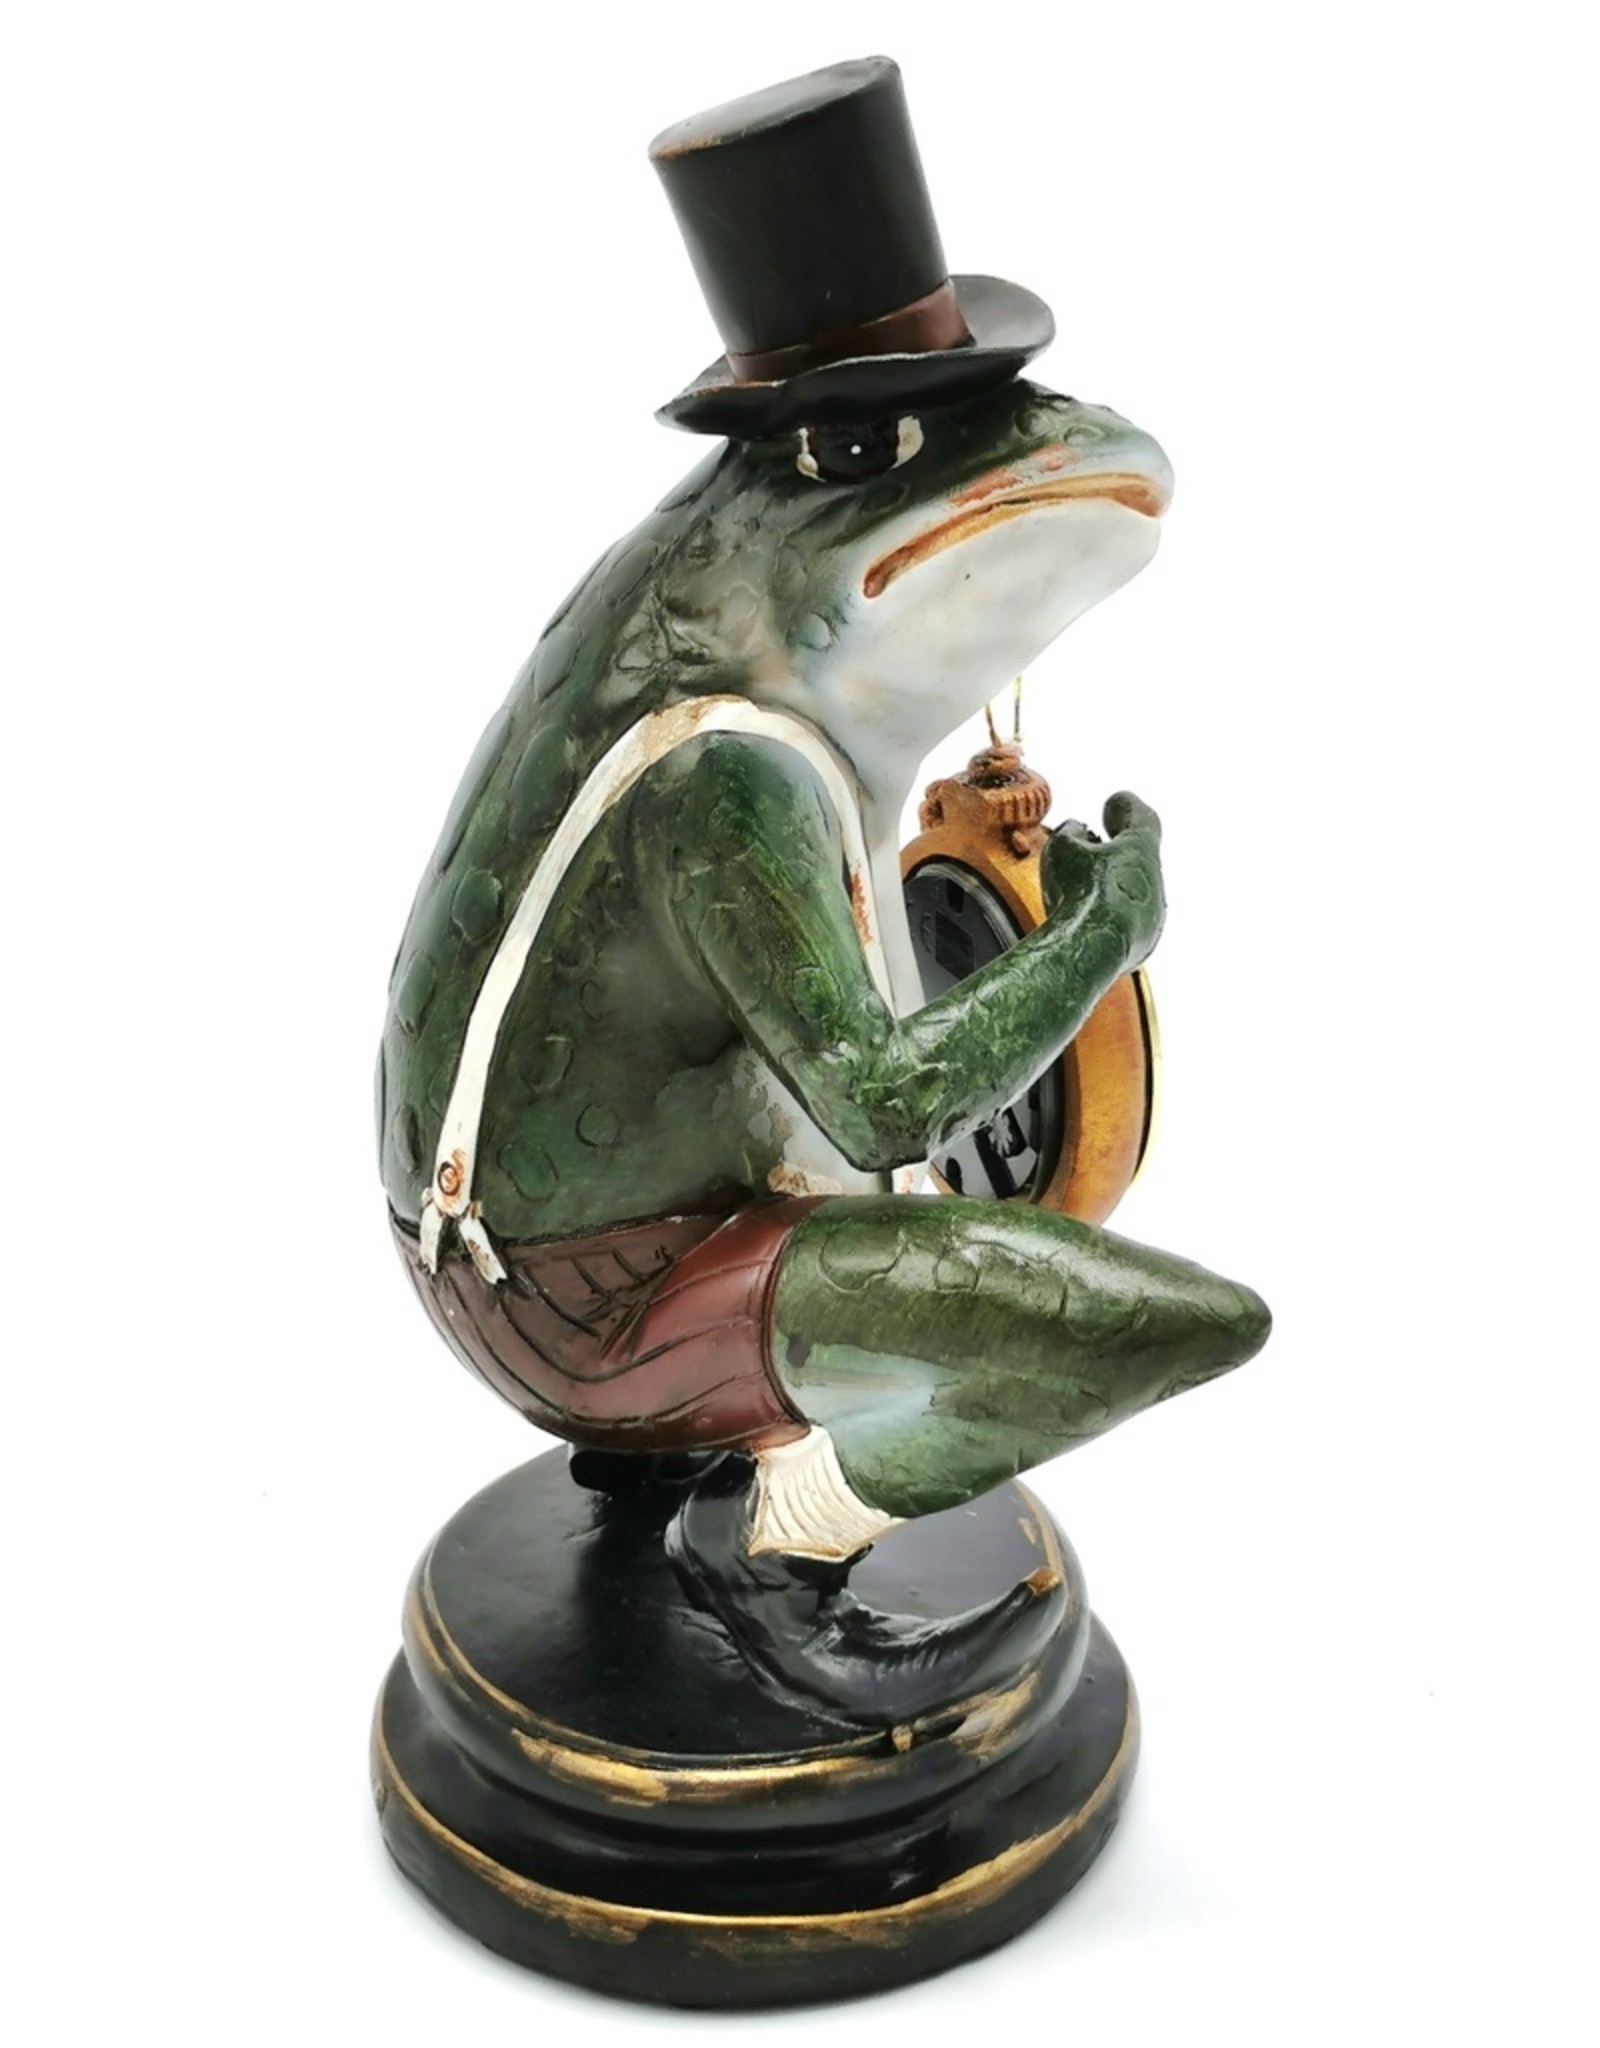 Trukado Giftware & Lifestyle - Frog with Top Hat and Clock figurine 21cm